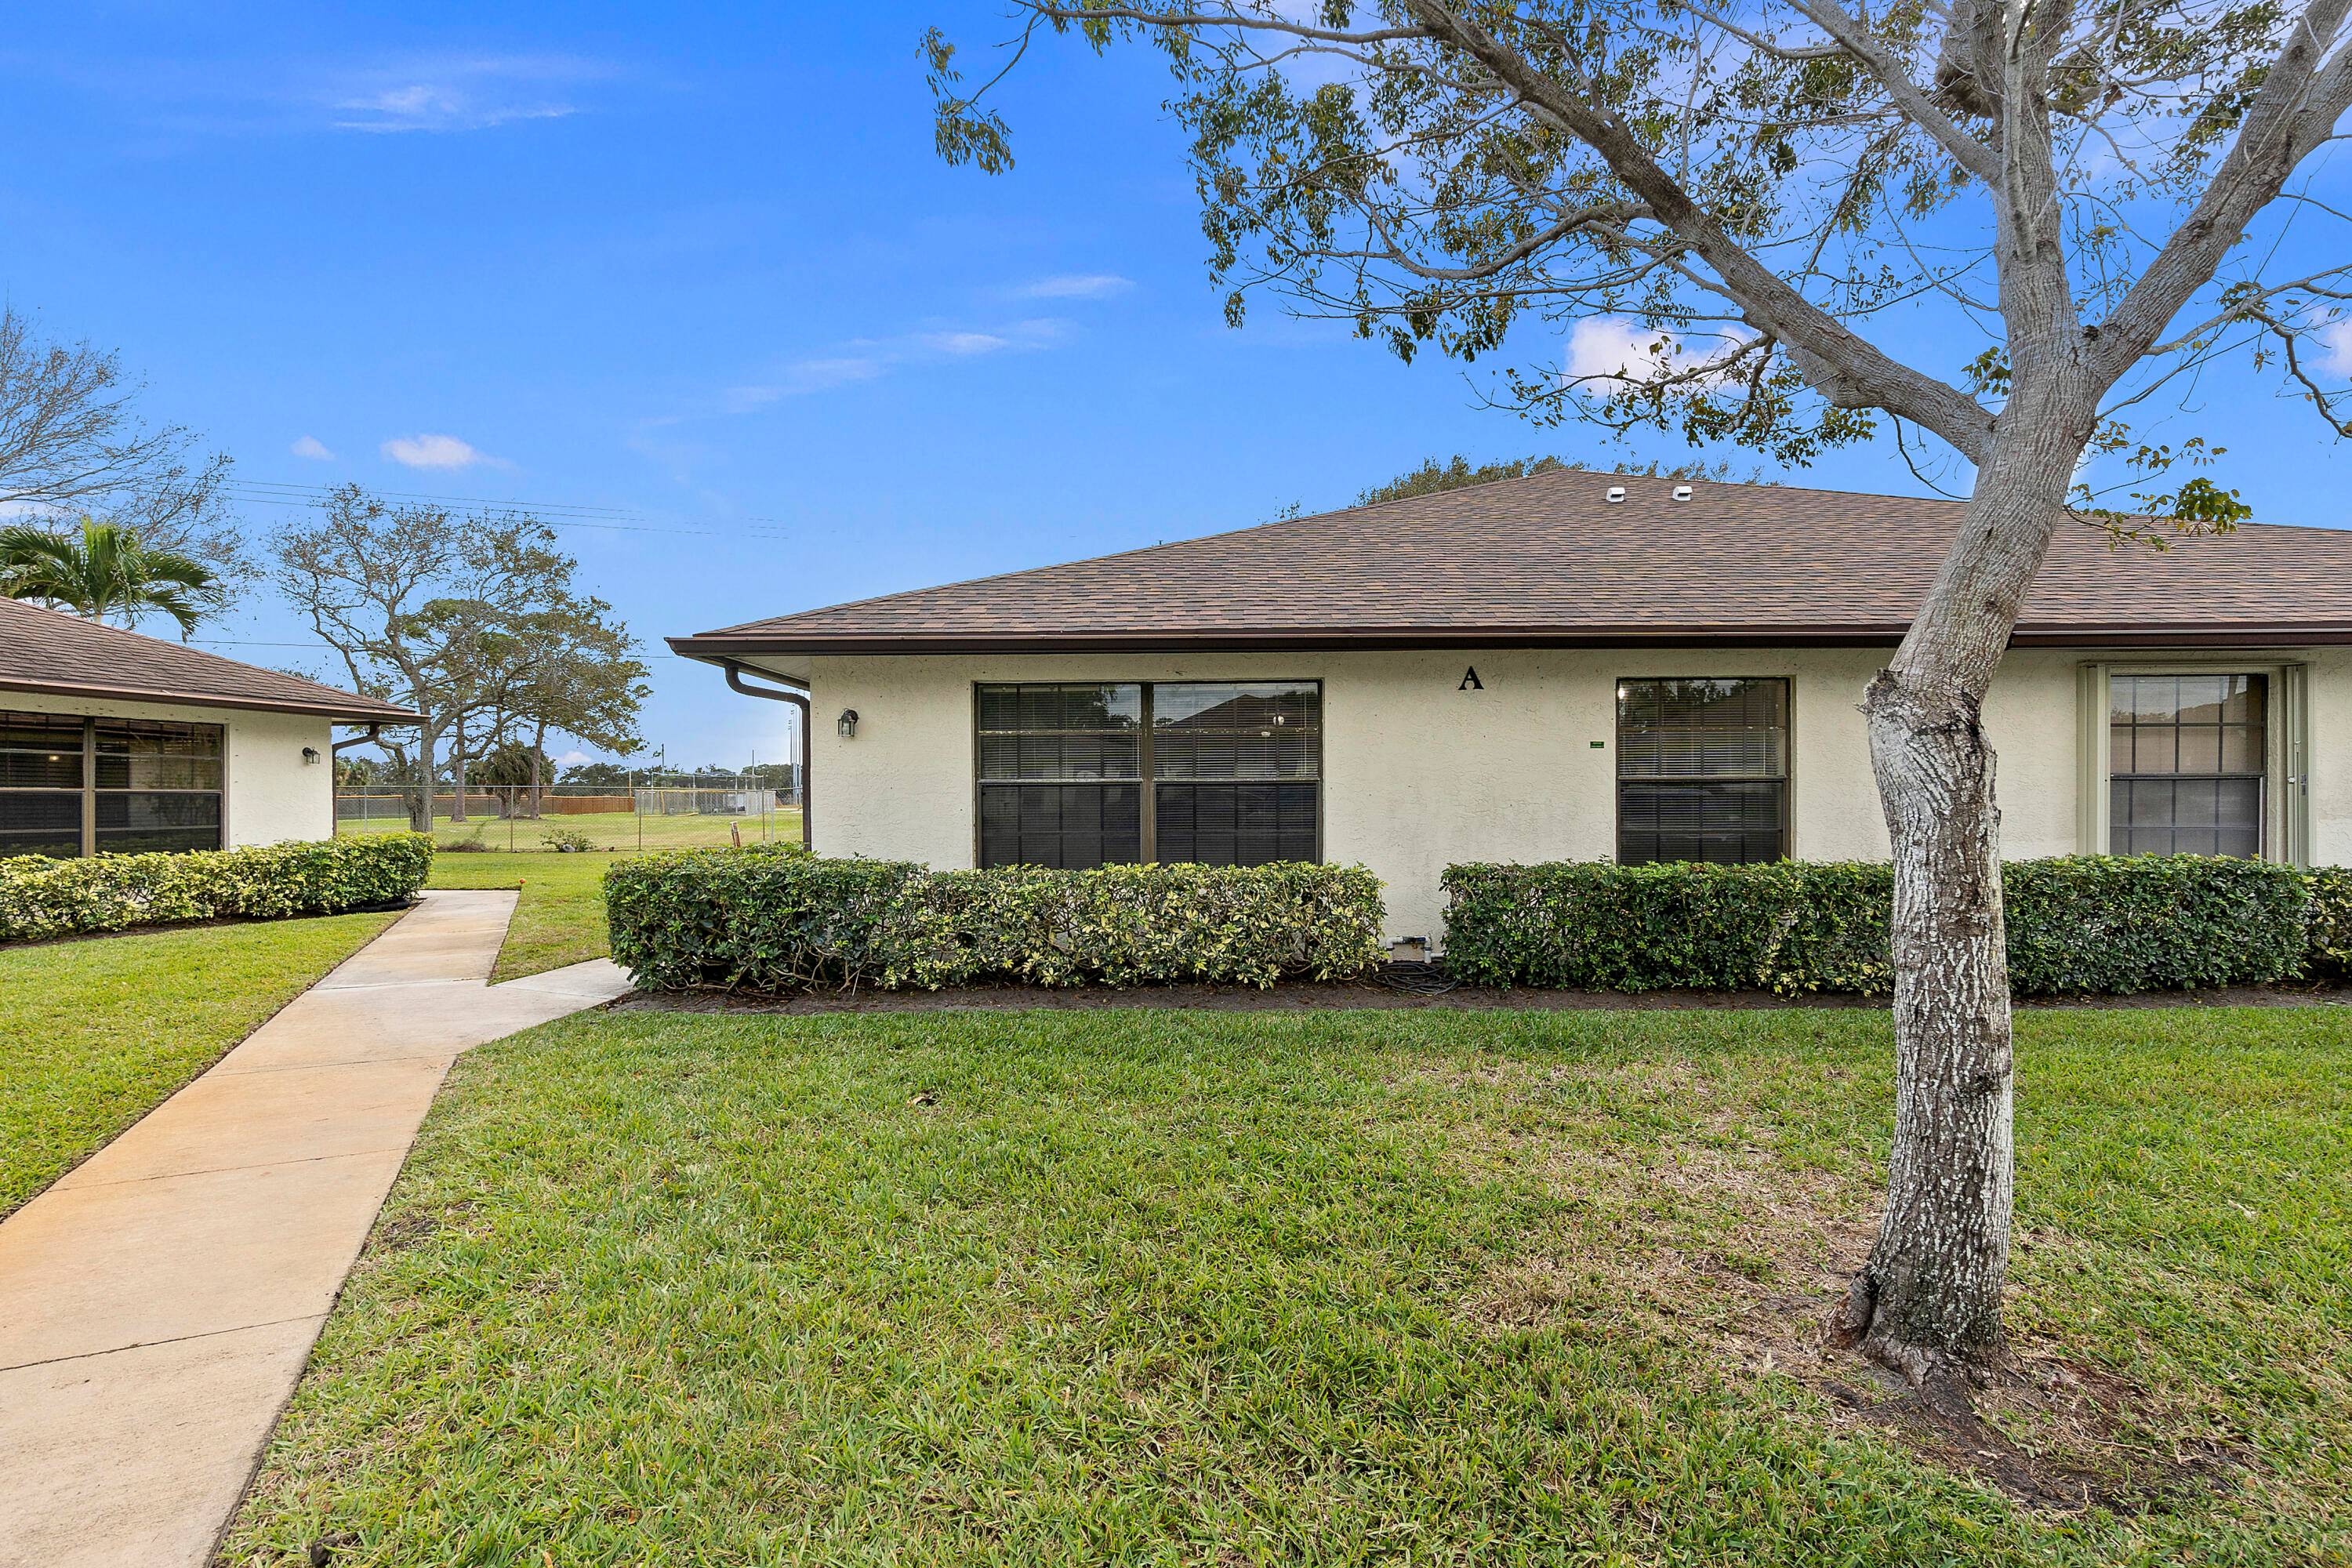 Motivated Seller ! Affordable 3 Bedroom, 2 Bath Villa in the desirable Villages on Longwood.